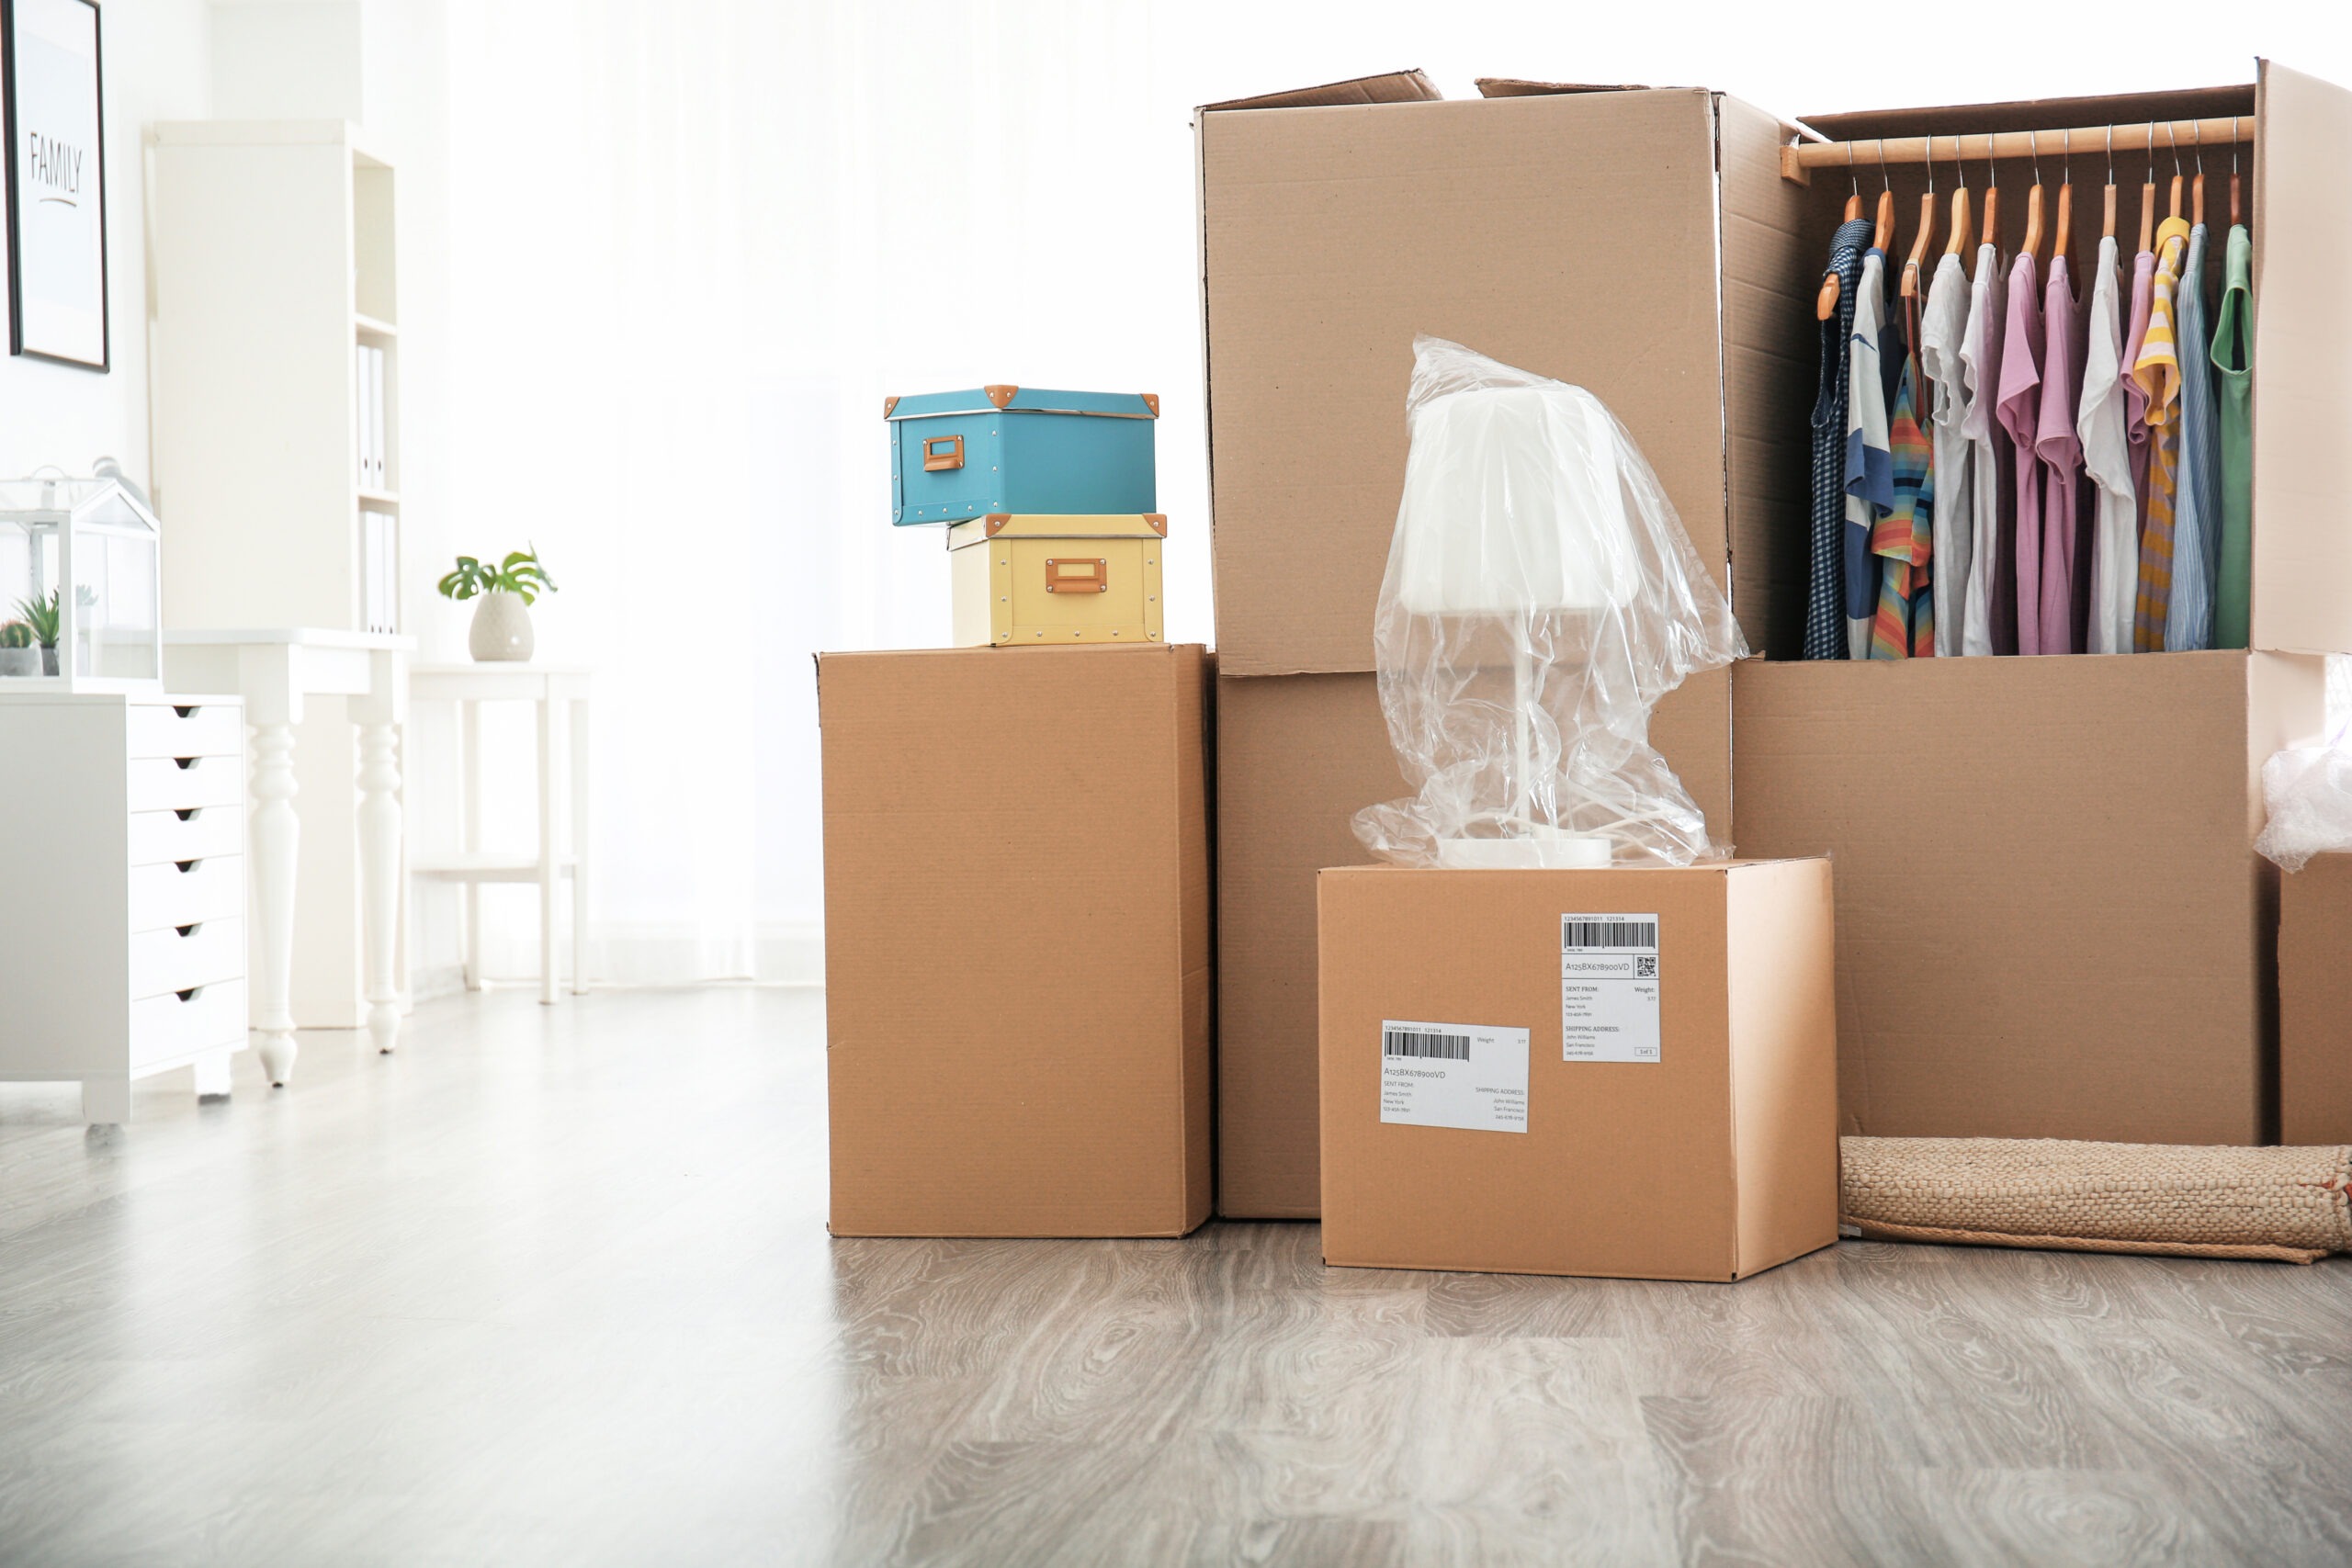 Free moving boxes with clothes indoors